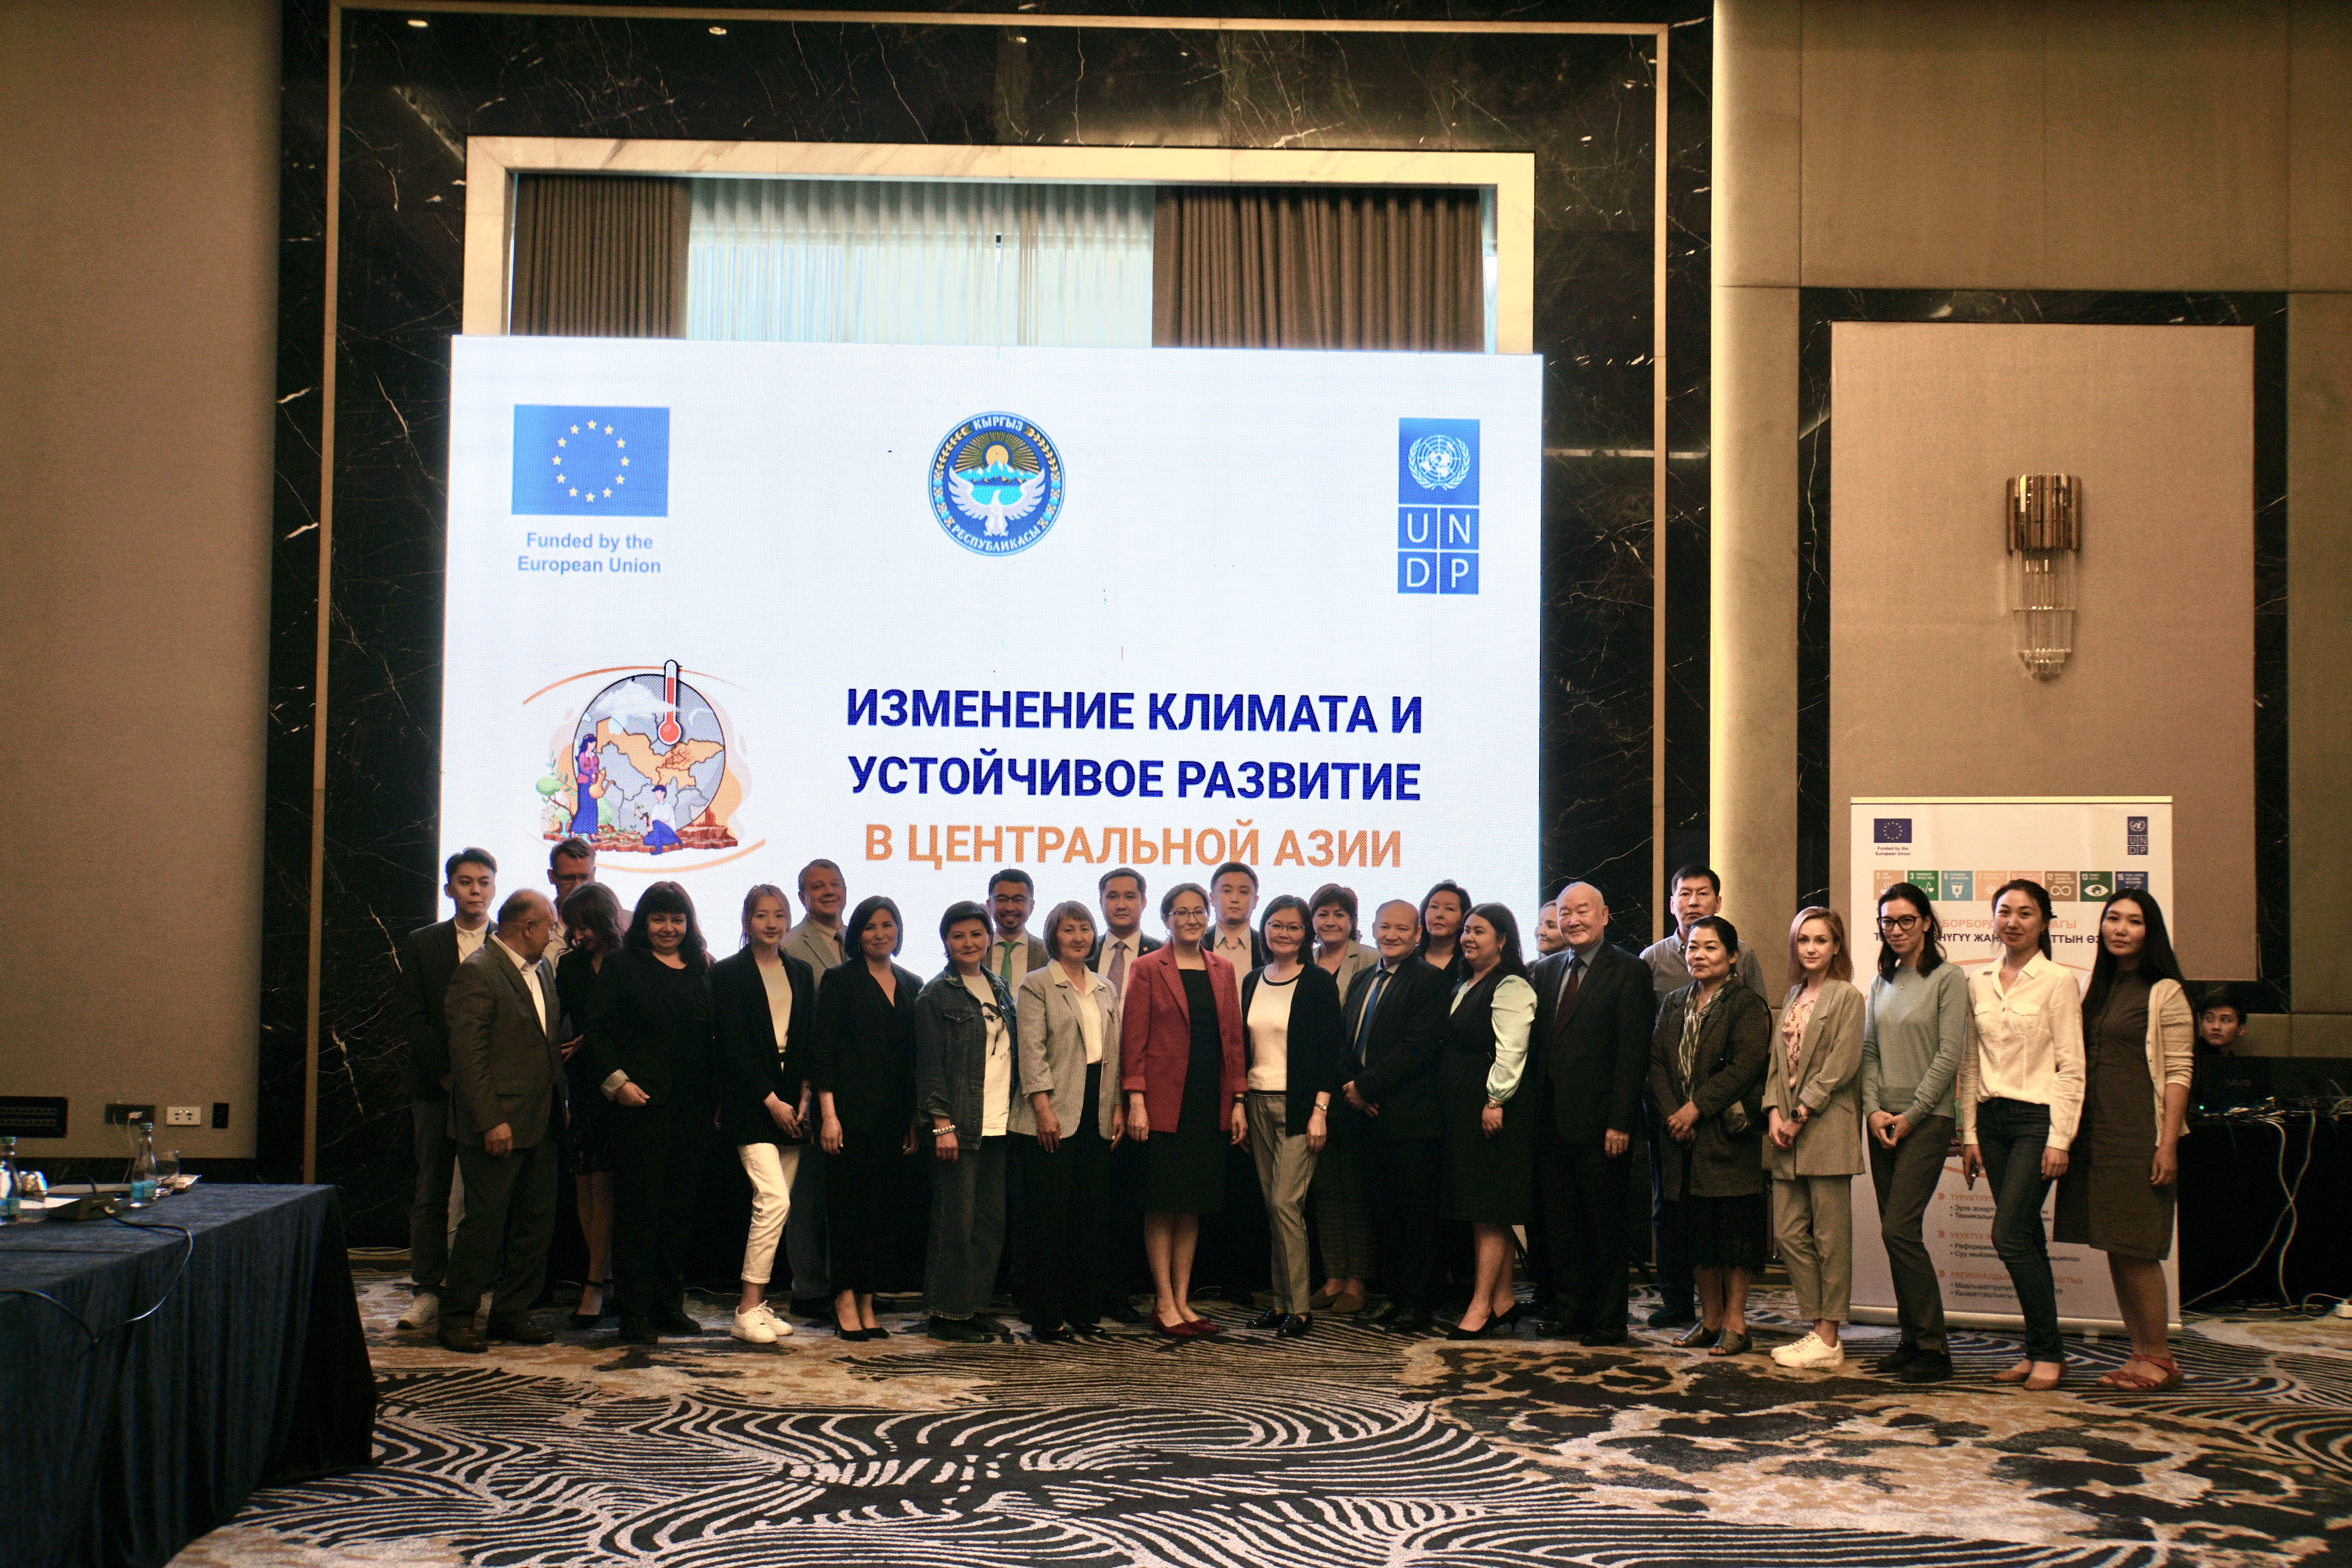 Group photo of participants at the Climate Change and Resilience in Central Asia meeting.